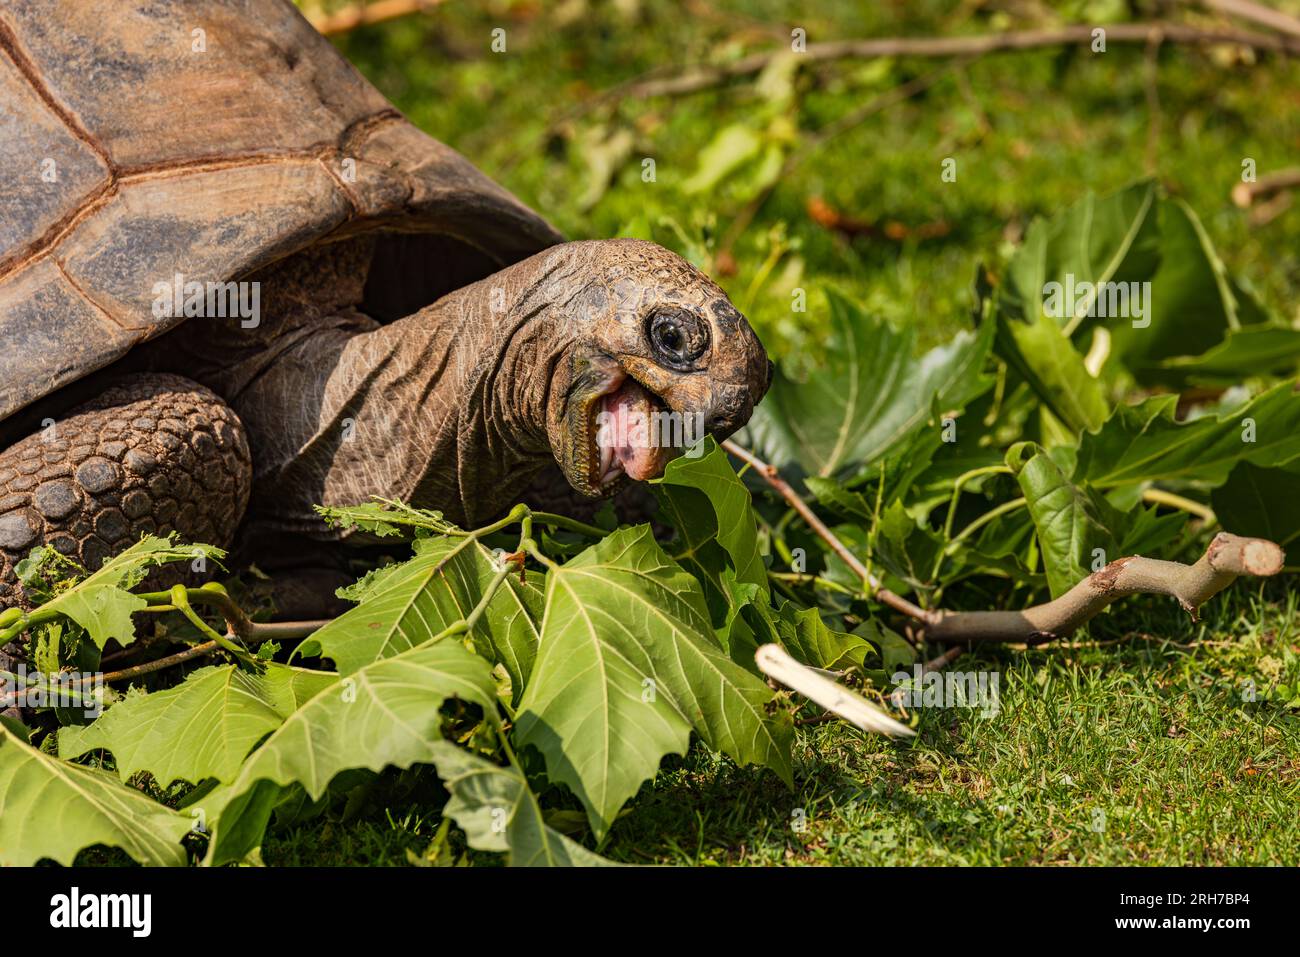 Close-up of a tortoise eating green leaves Stock Photo